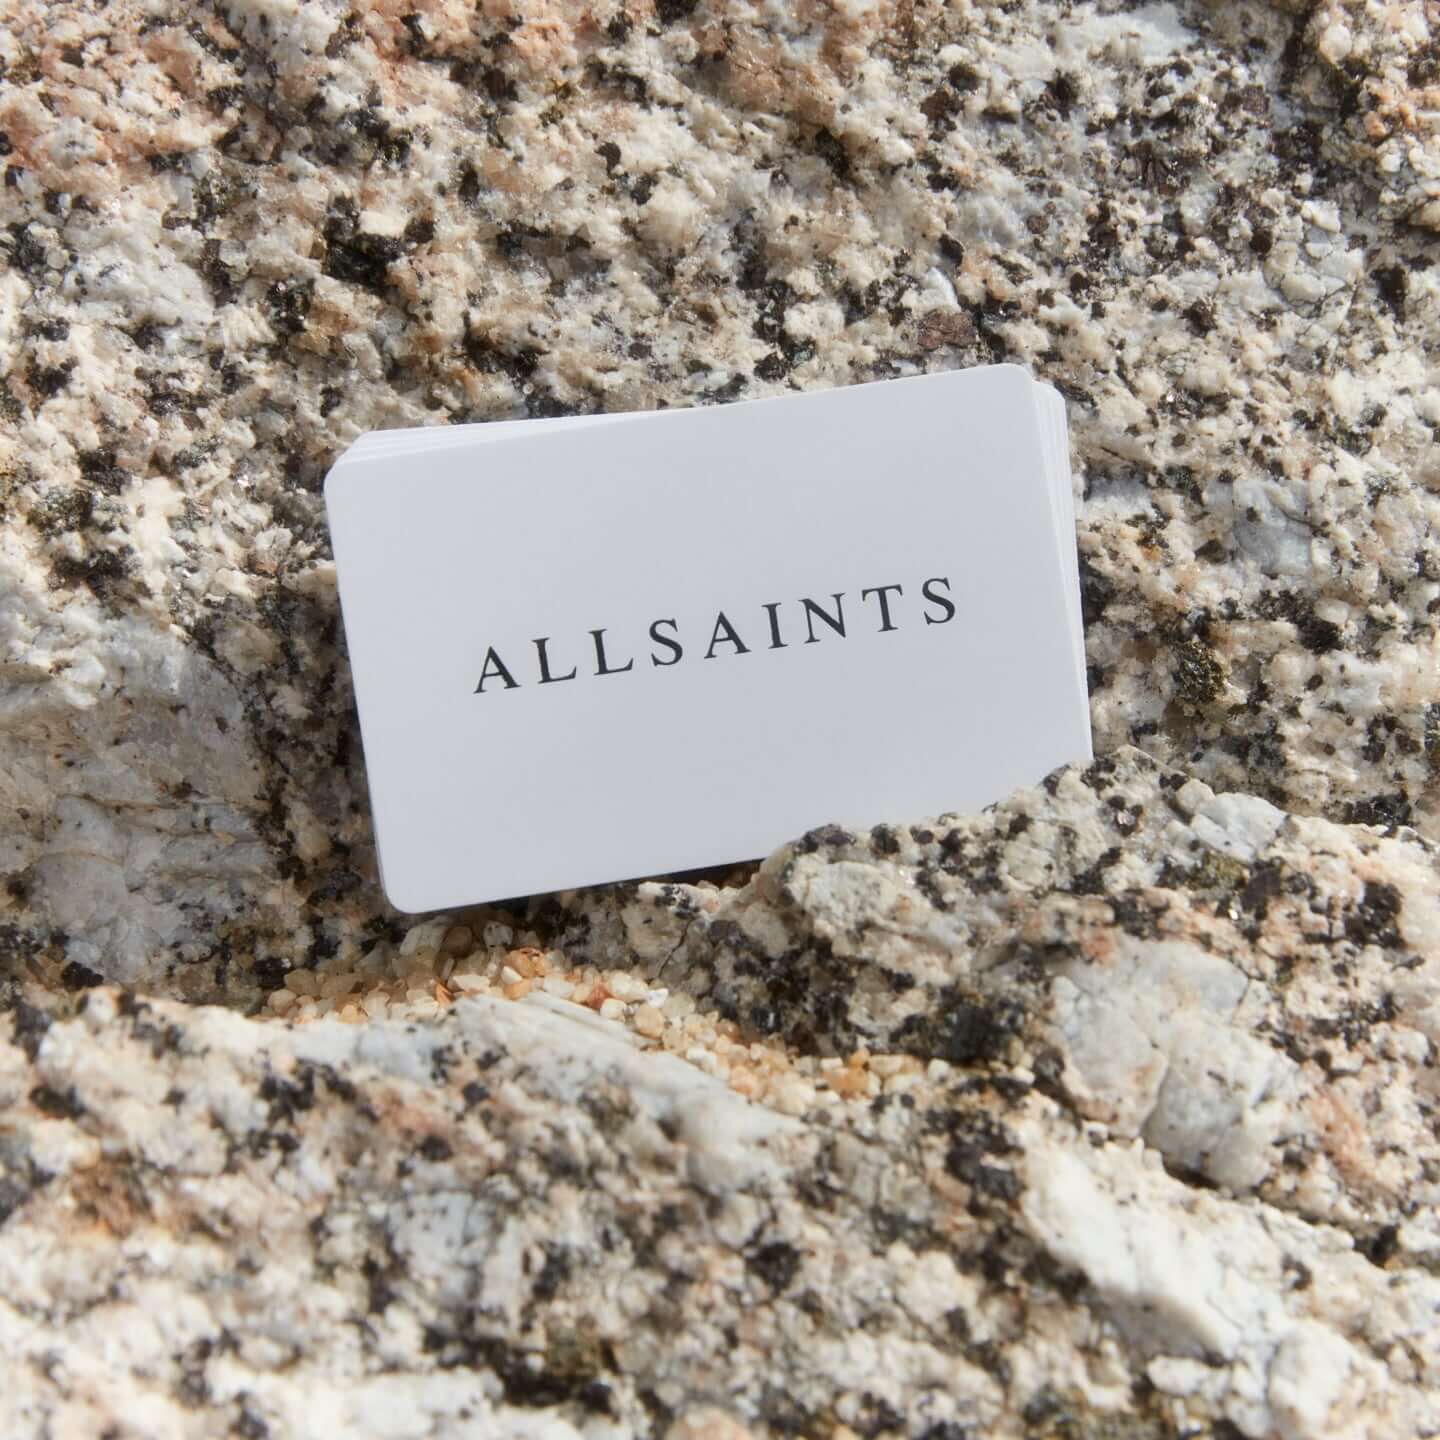 Photograph showing a set of AllSaints GiftCards on a textured stone